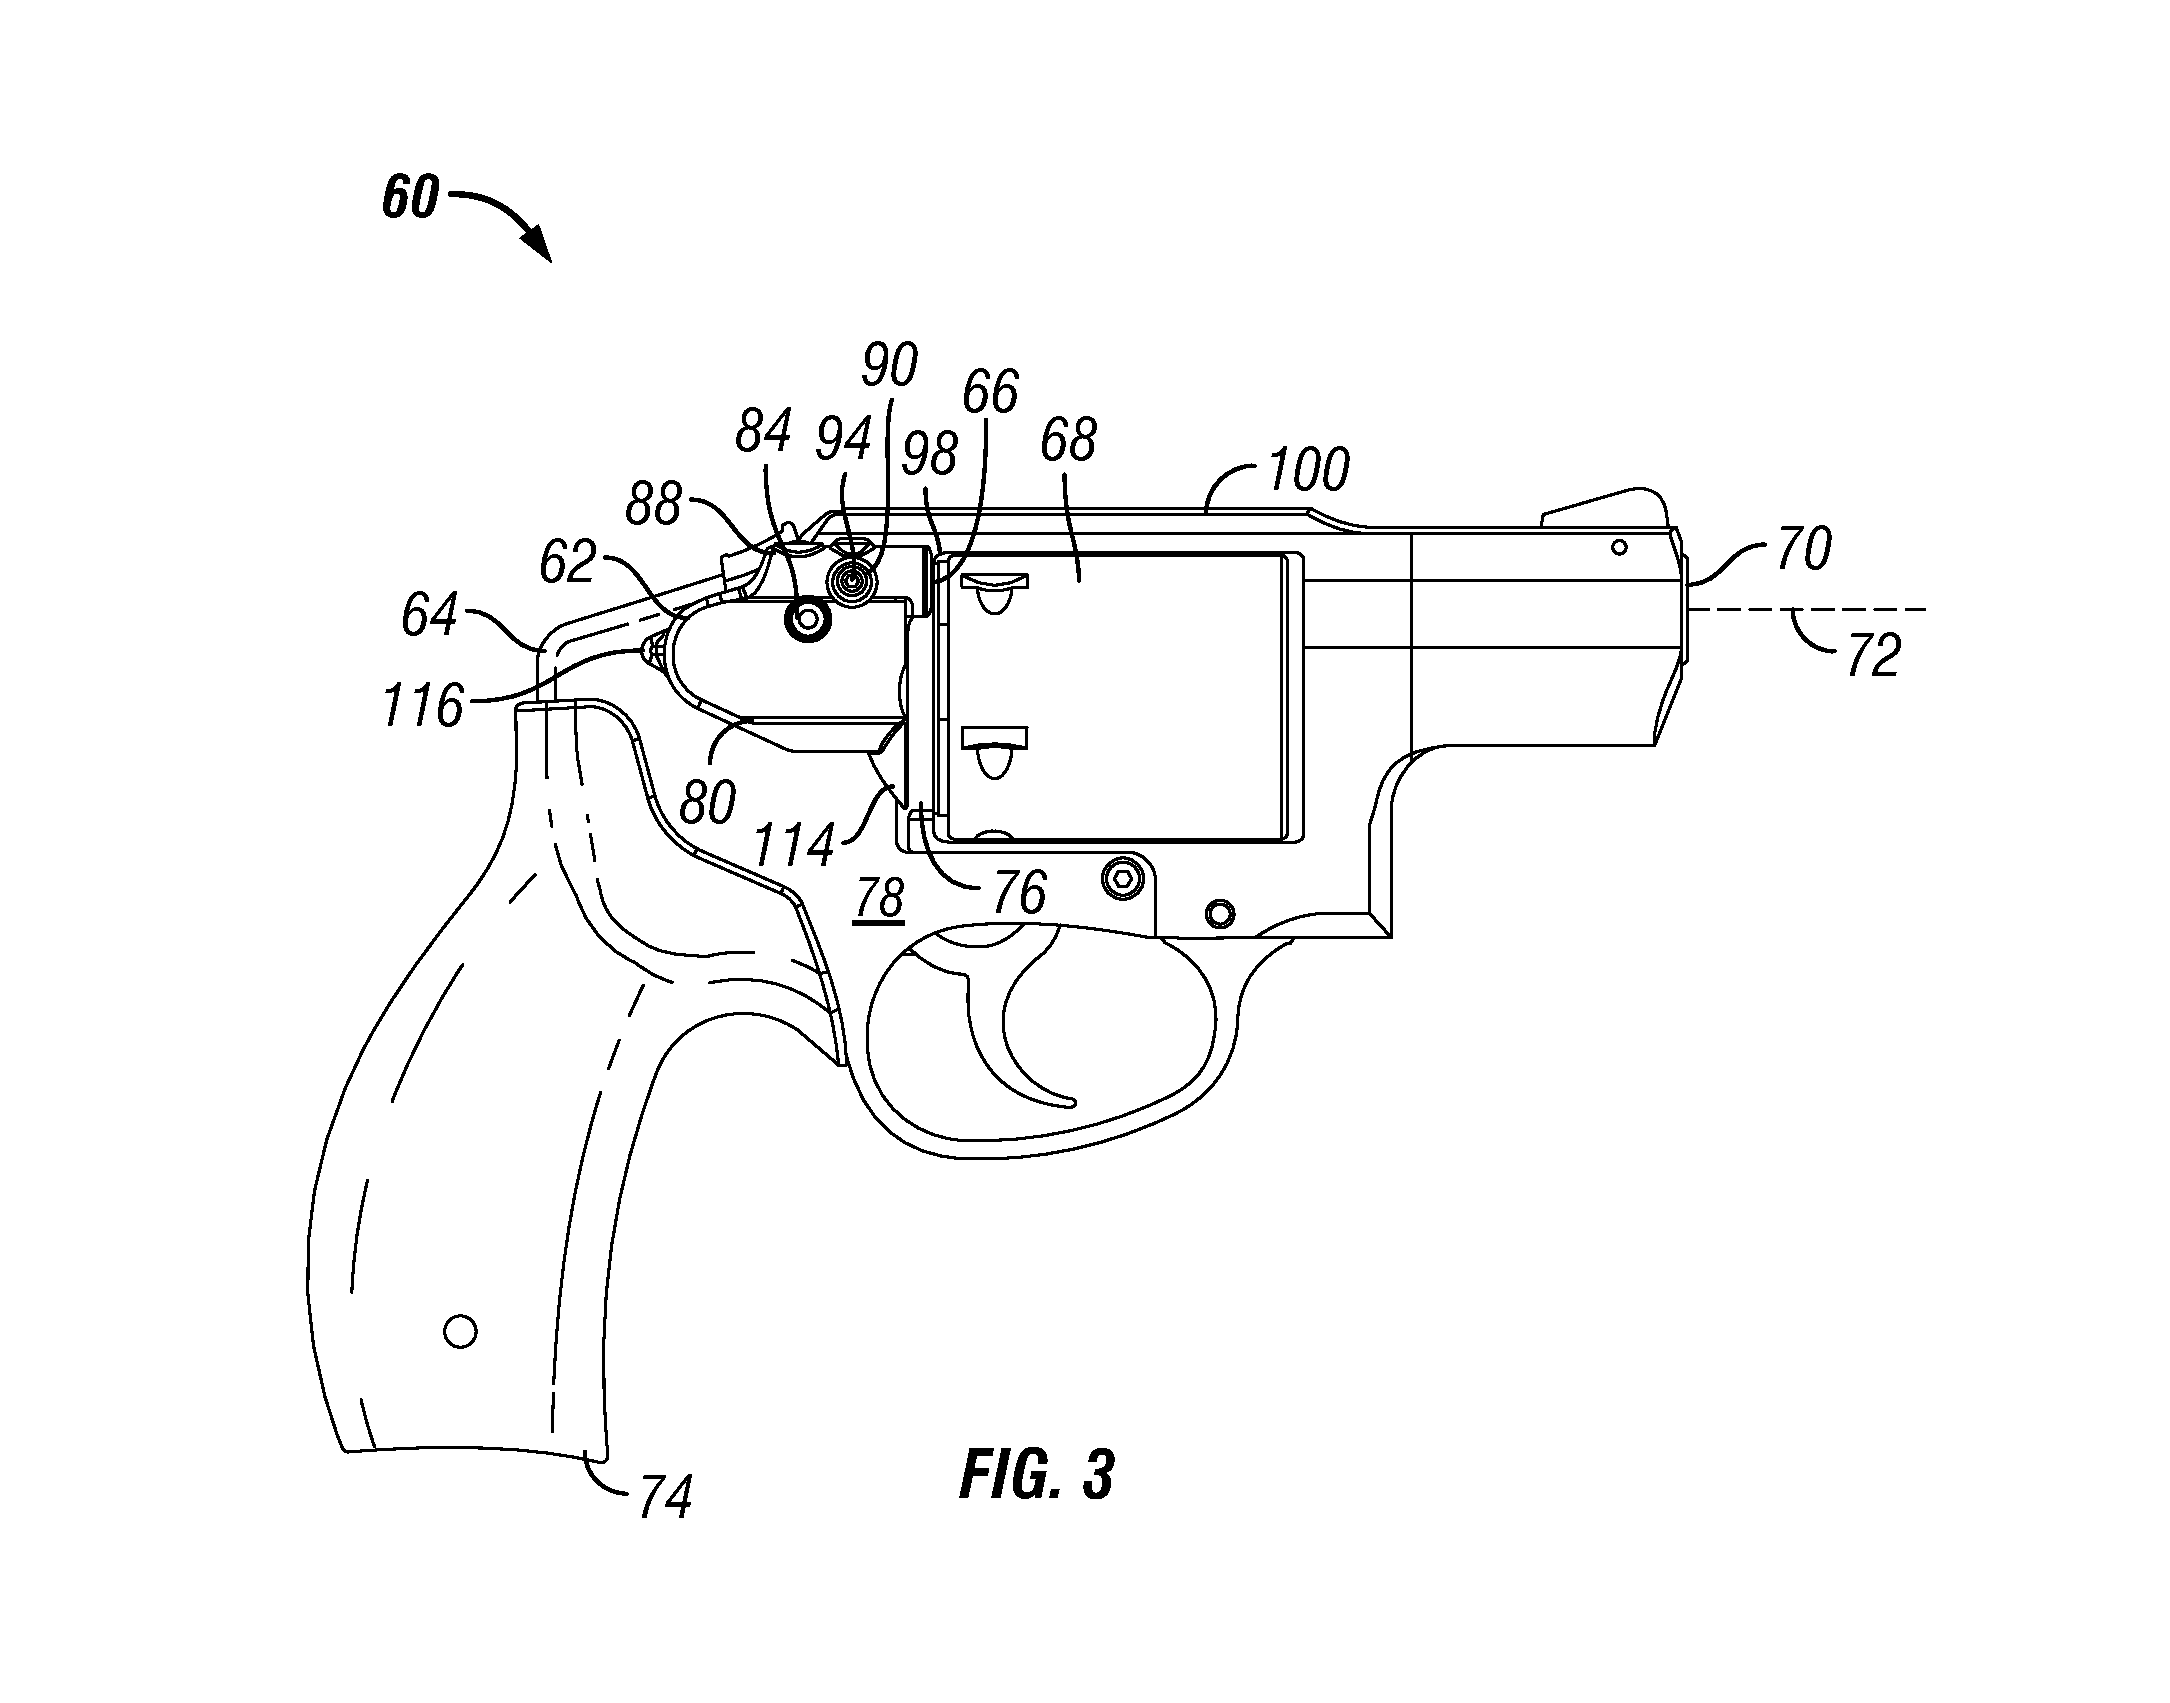 Frame-mounted laser aiming device